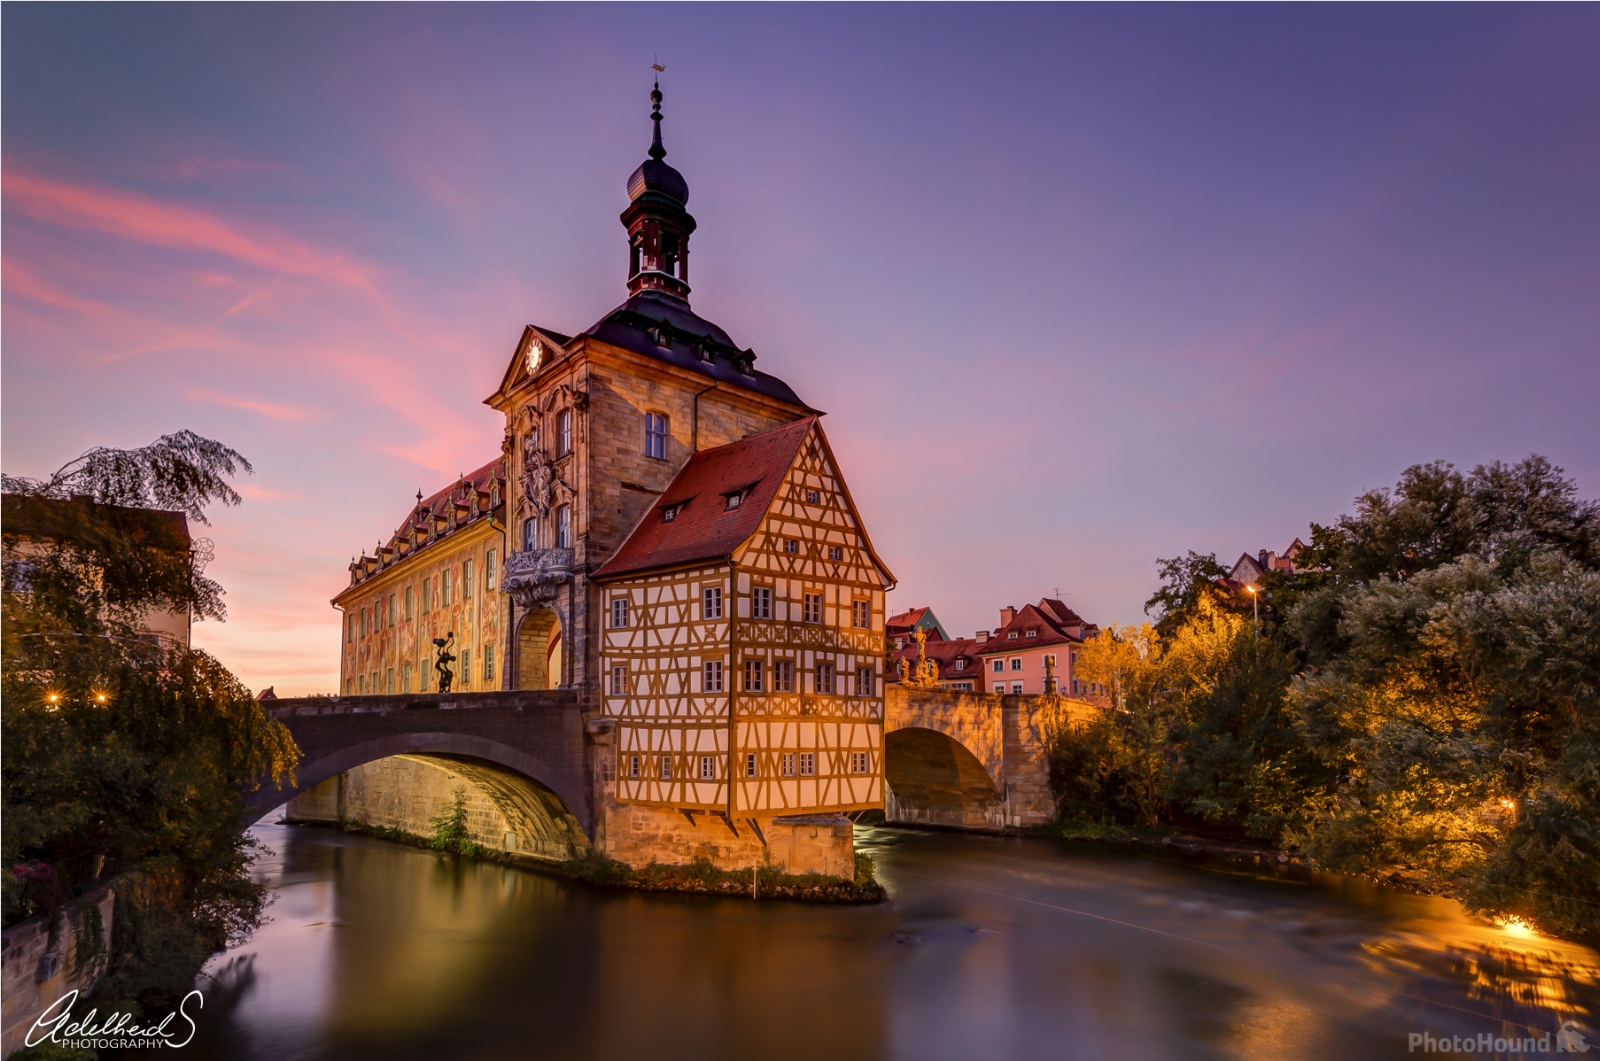 Image of Bamberg Altes Rathaus (Old Council) by Adelheid Smitt